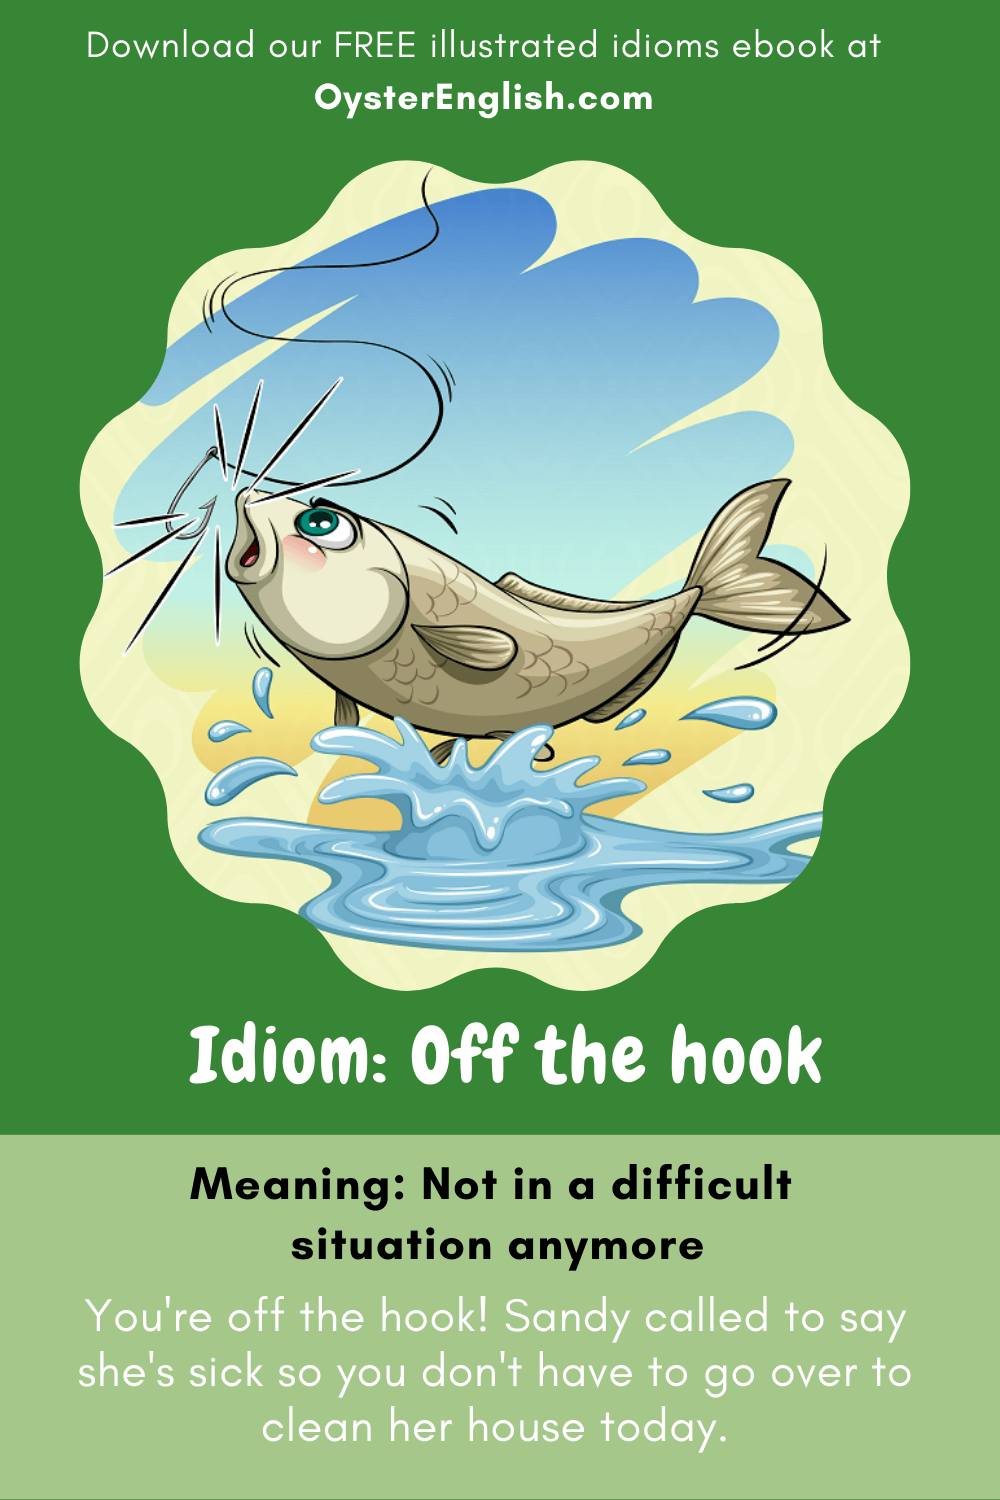 Idiom: Off the hook (meaning examples)